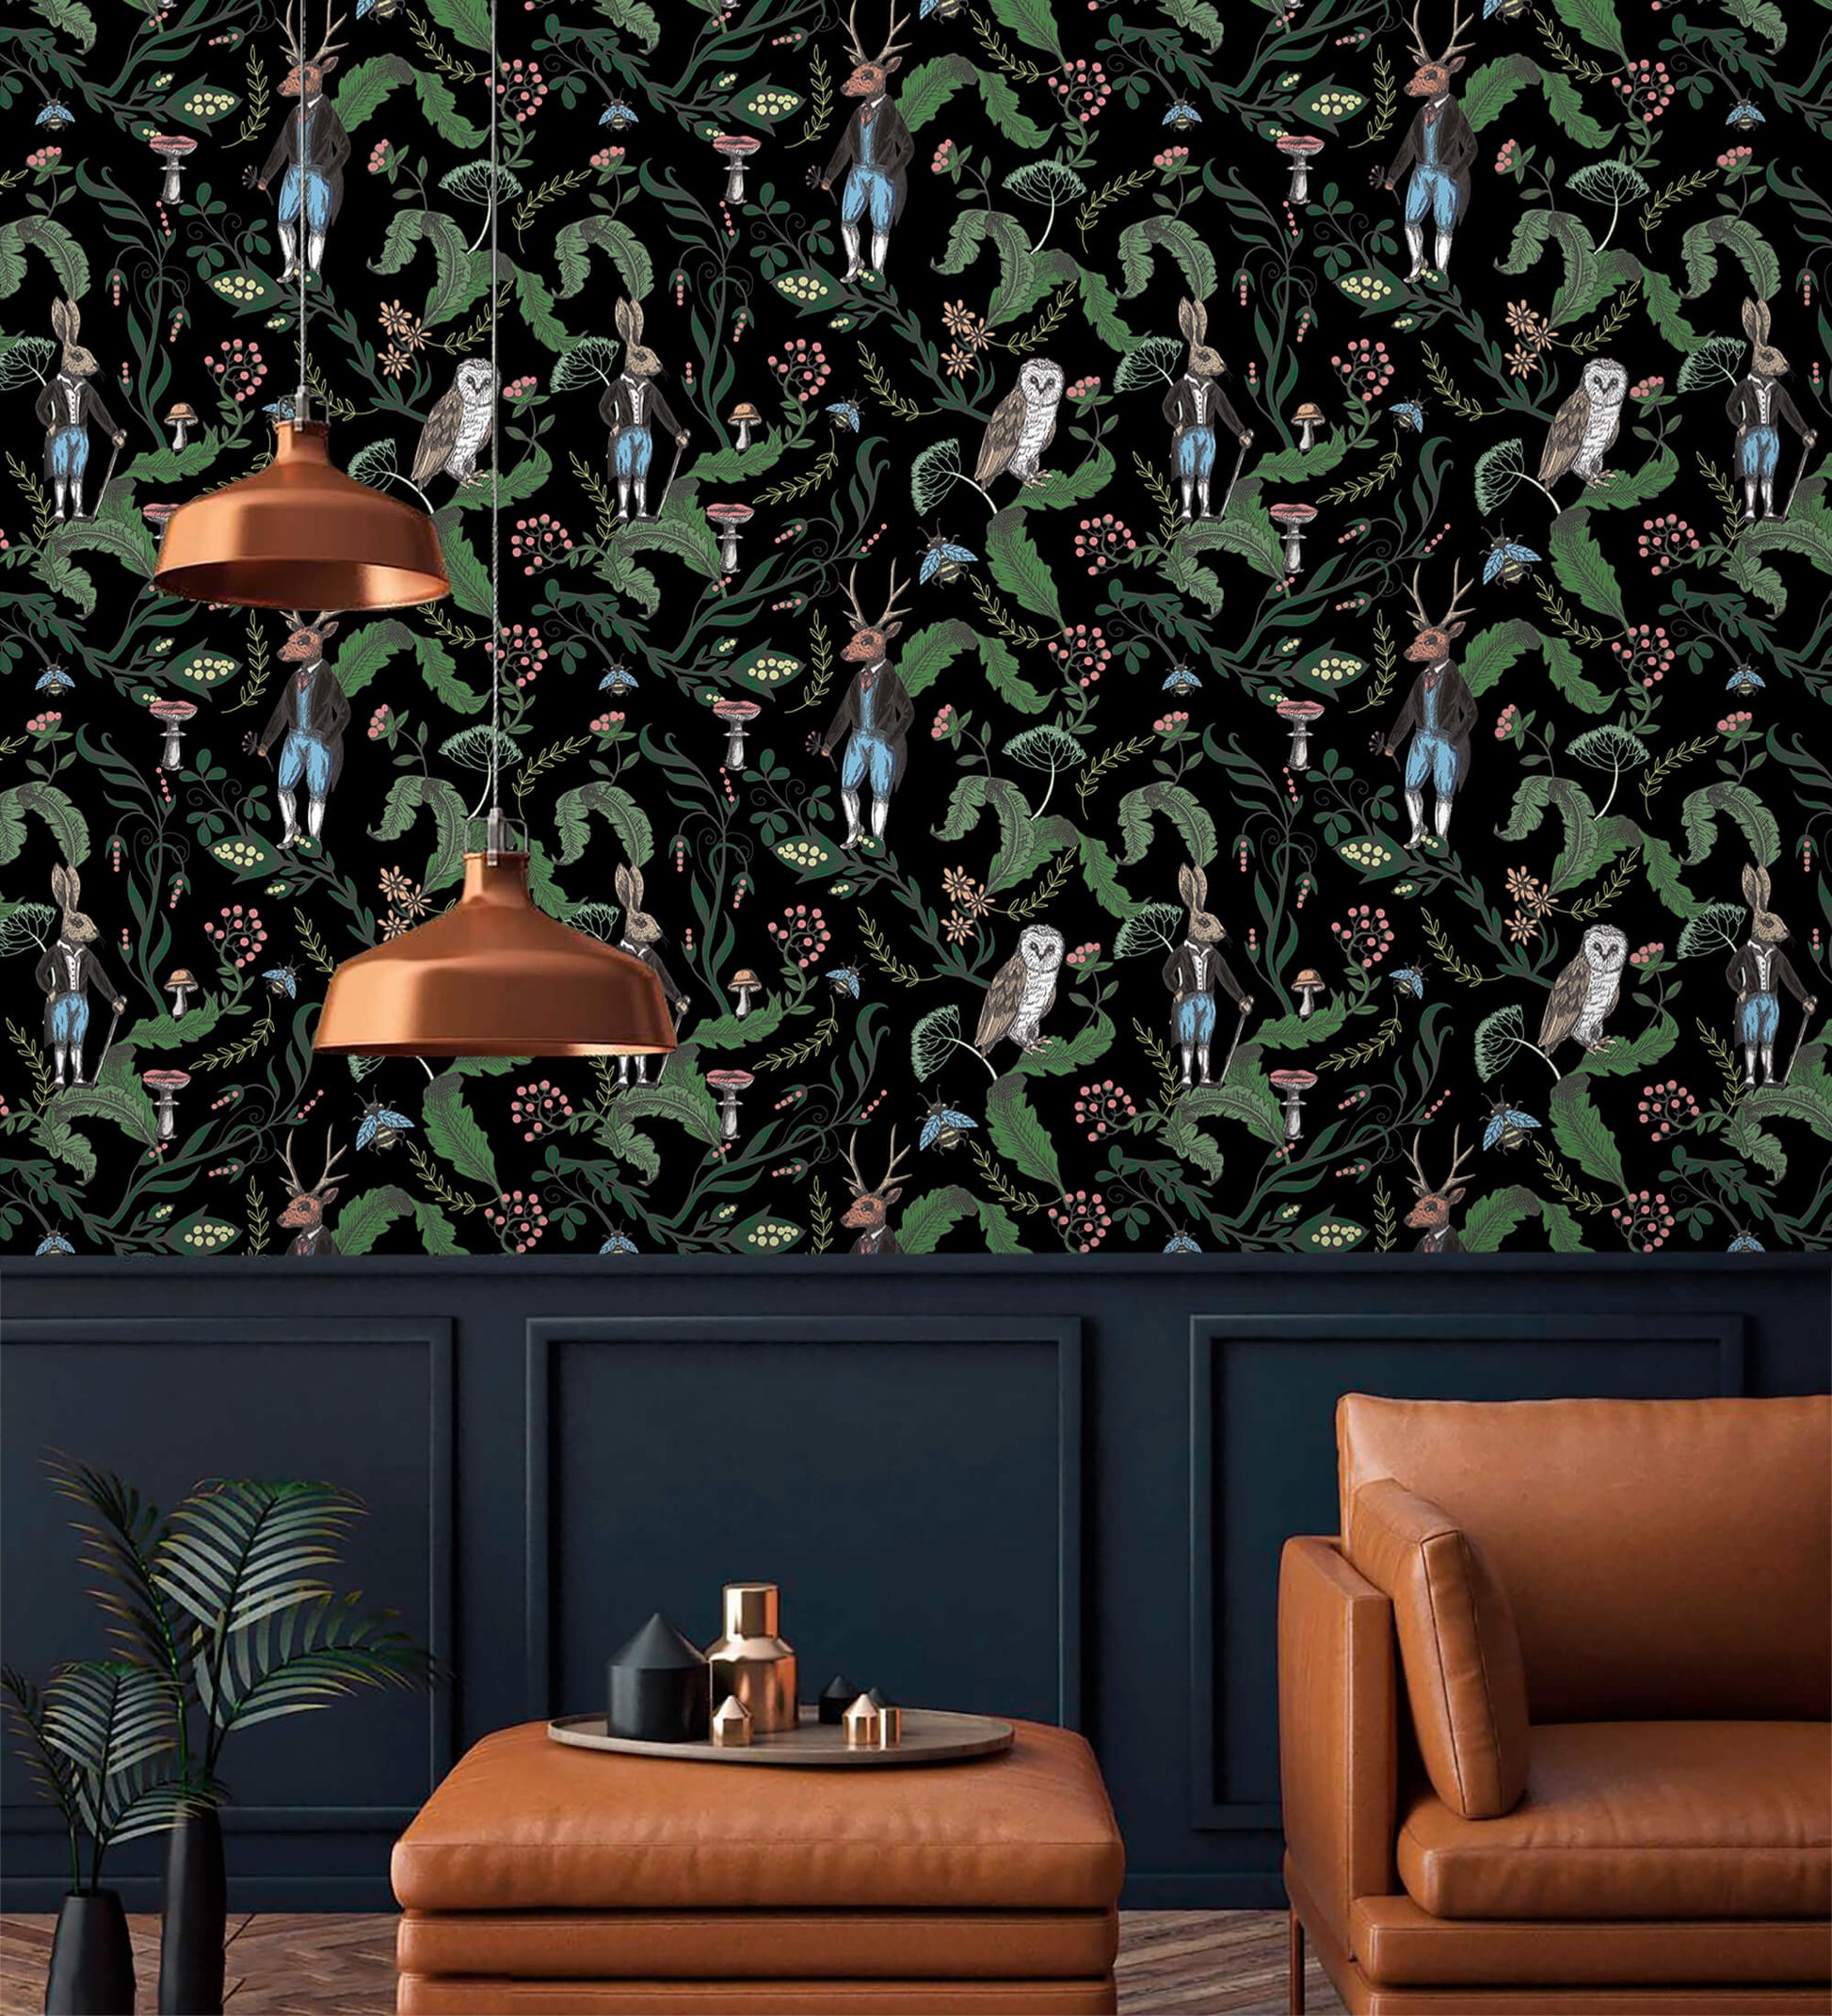 Dark Woodland Wallpaper: Bring the enchantment of the forest into your space with this rich and atmospheric design.